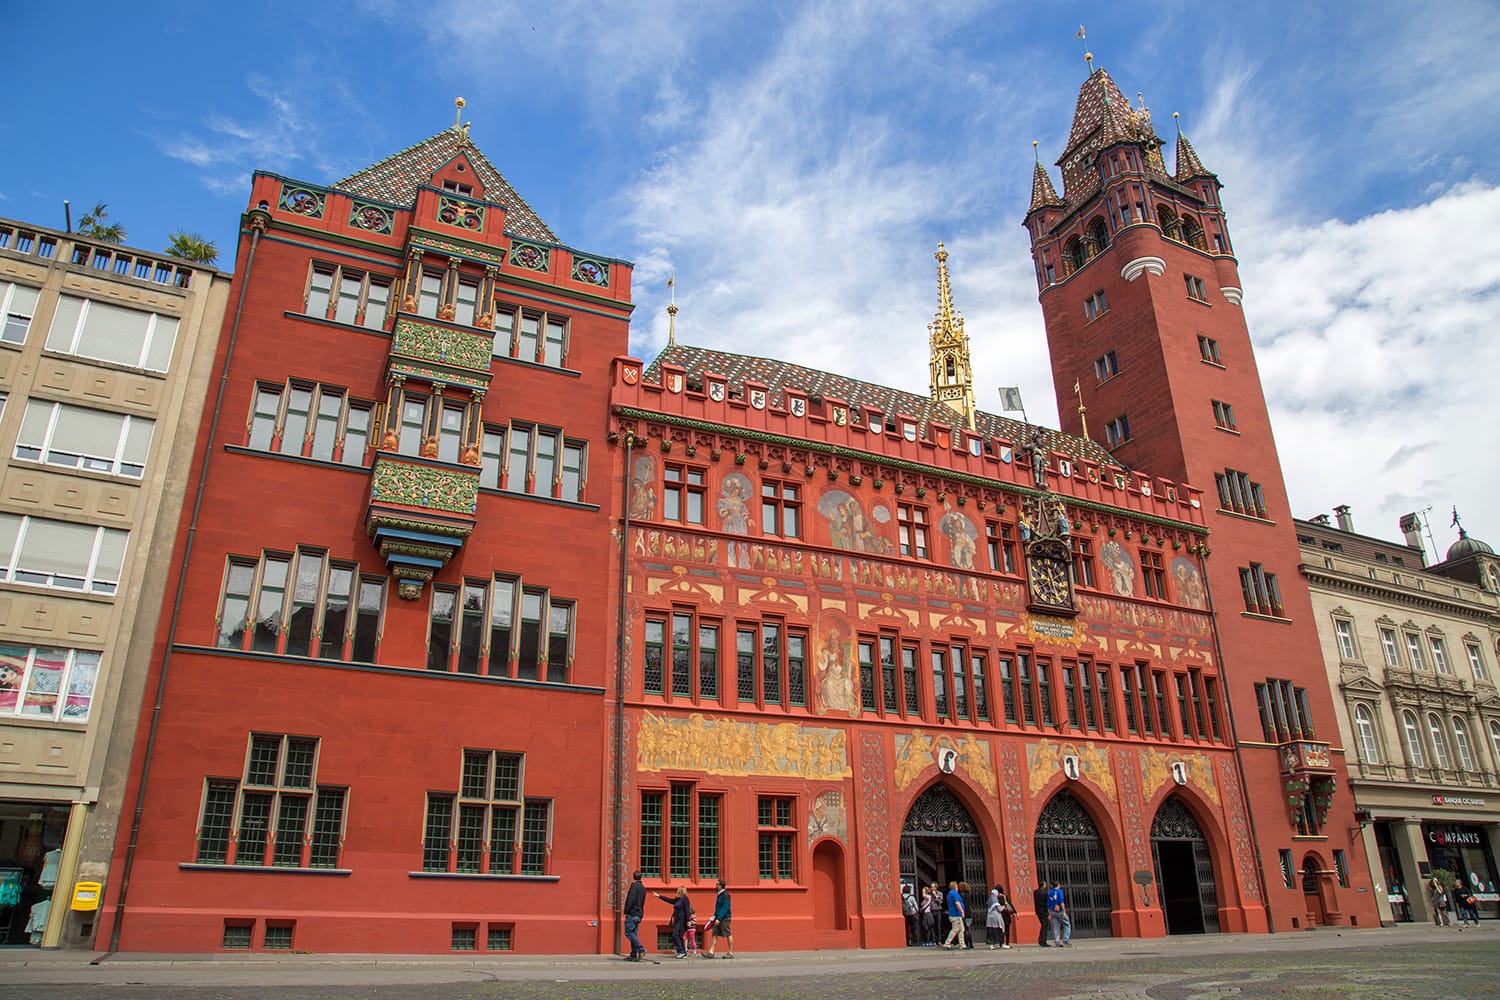 Town hall in Basel, Switzerland